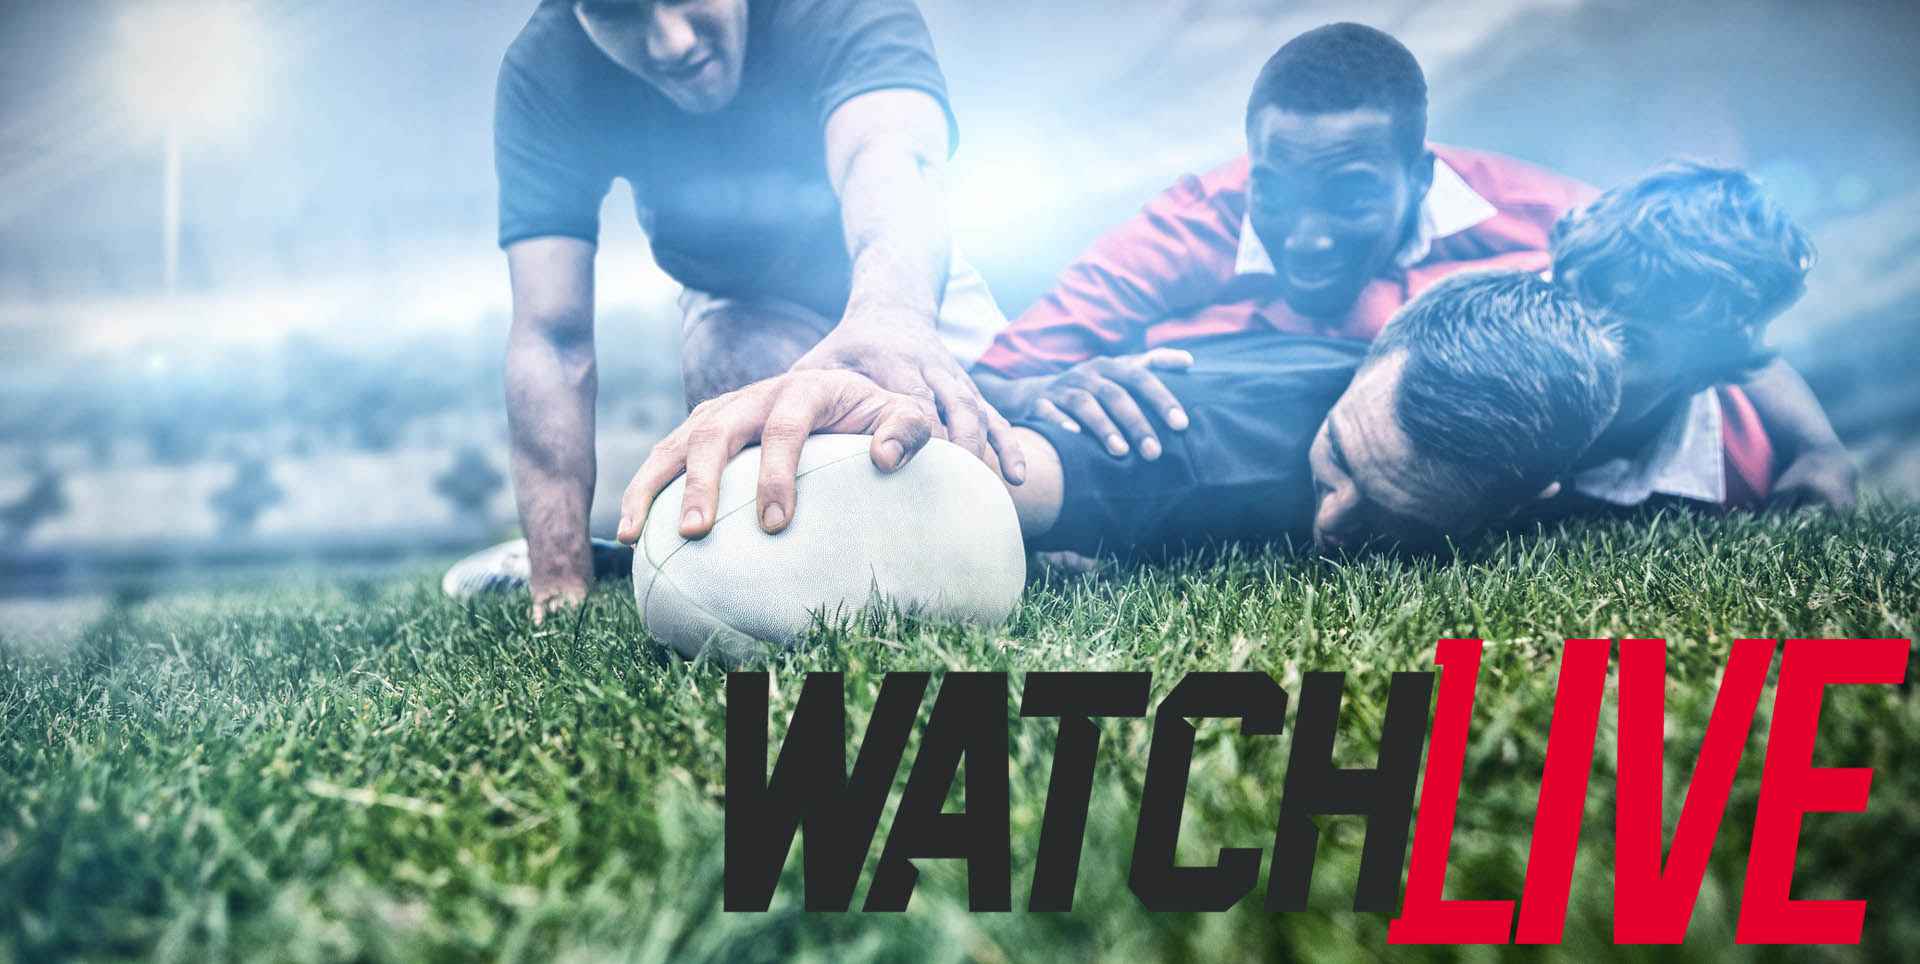 England Rugby World Cup Team 2019 Live Stream